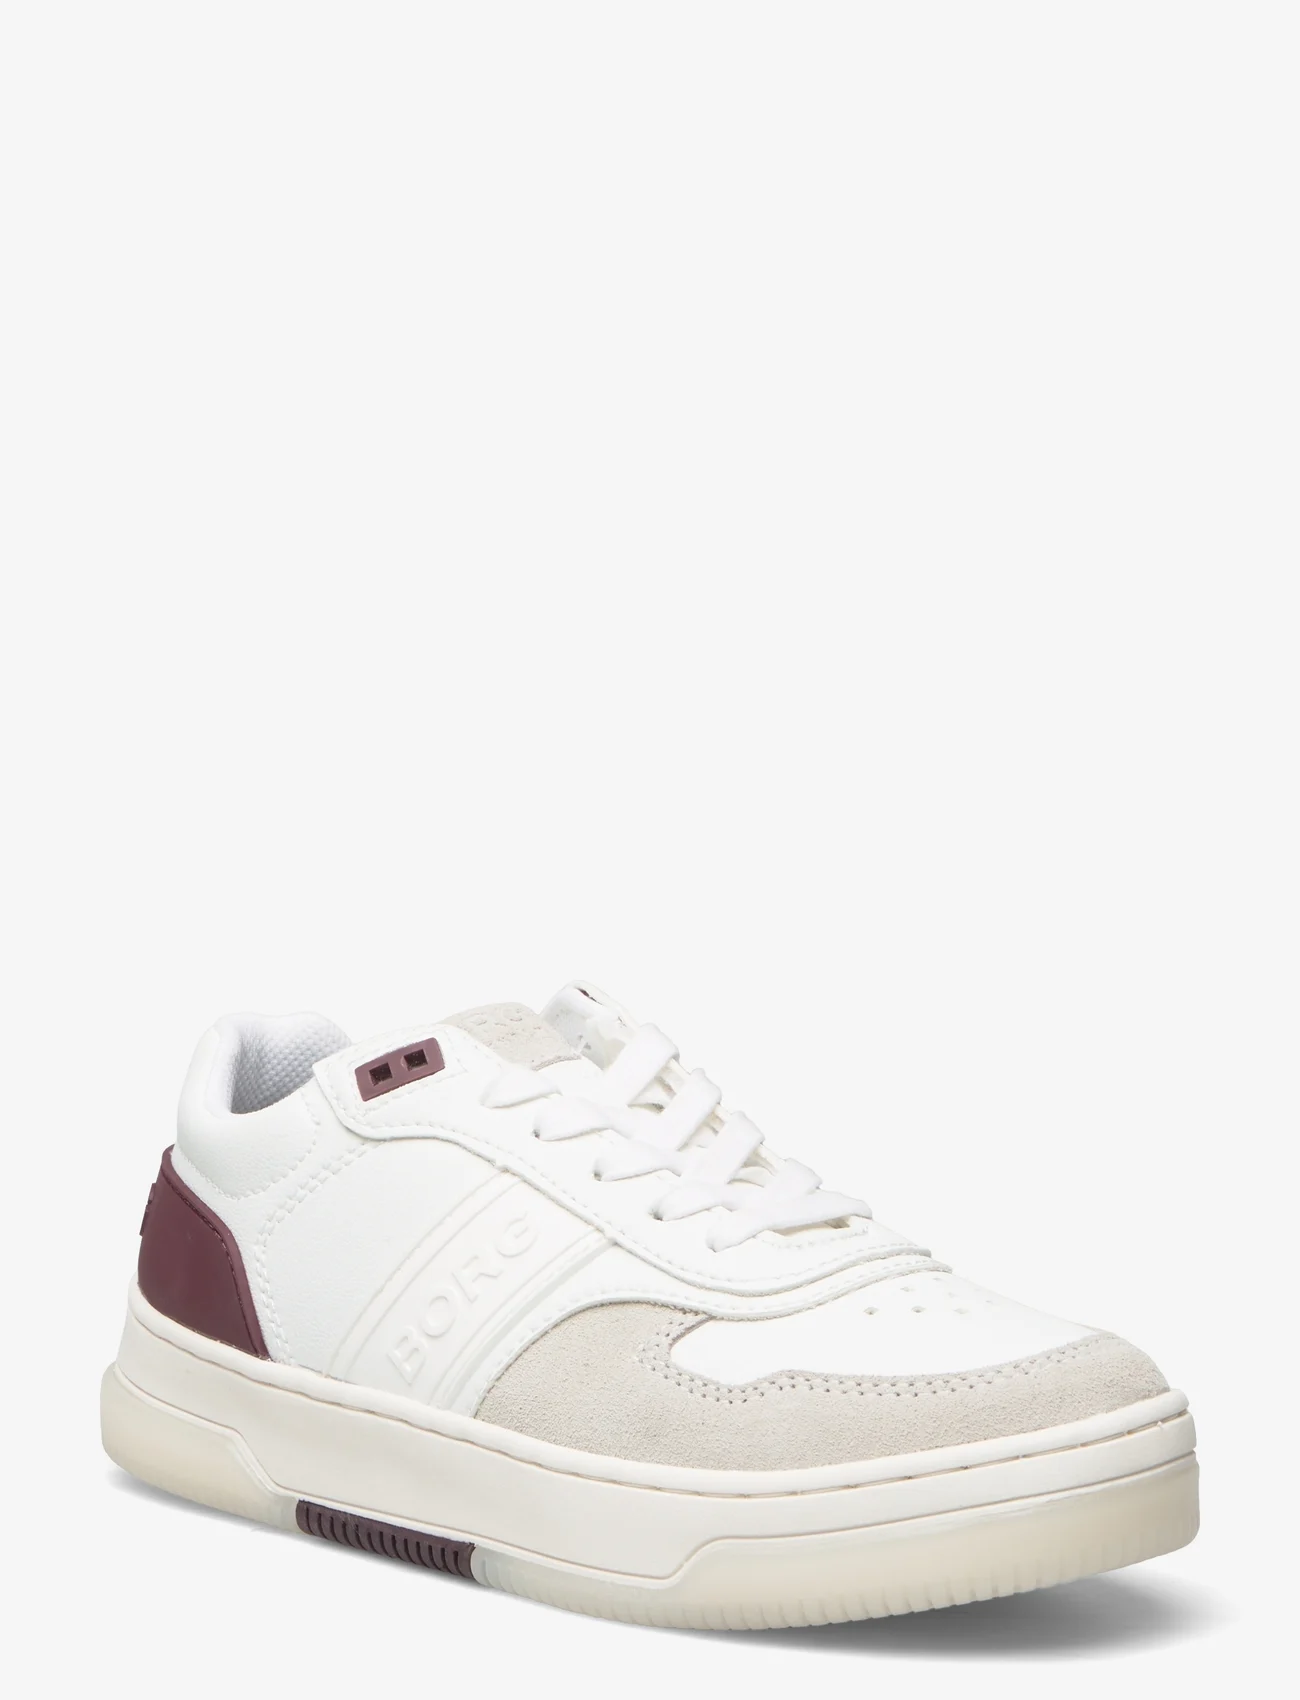 Björn Borg - T2300 CTR W - lave sneakers - wht-brgy - 0